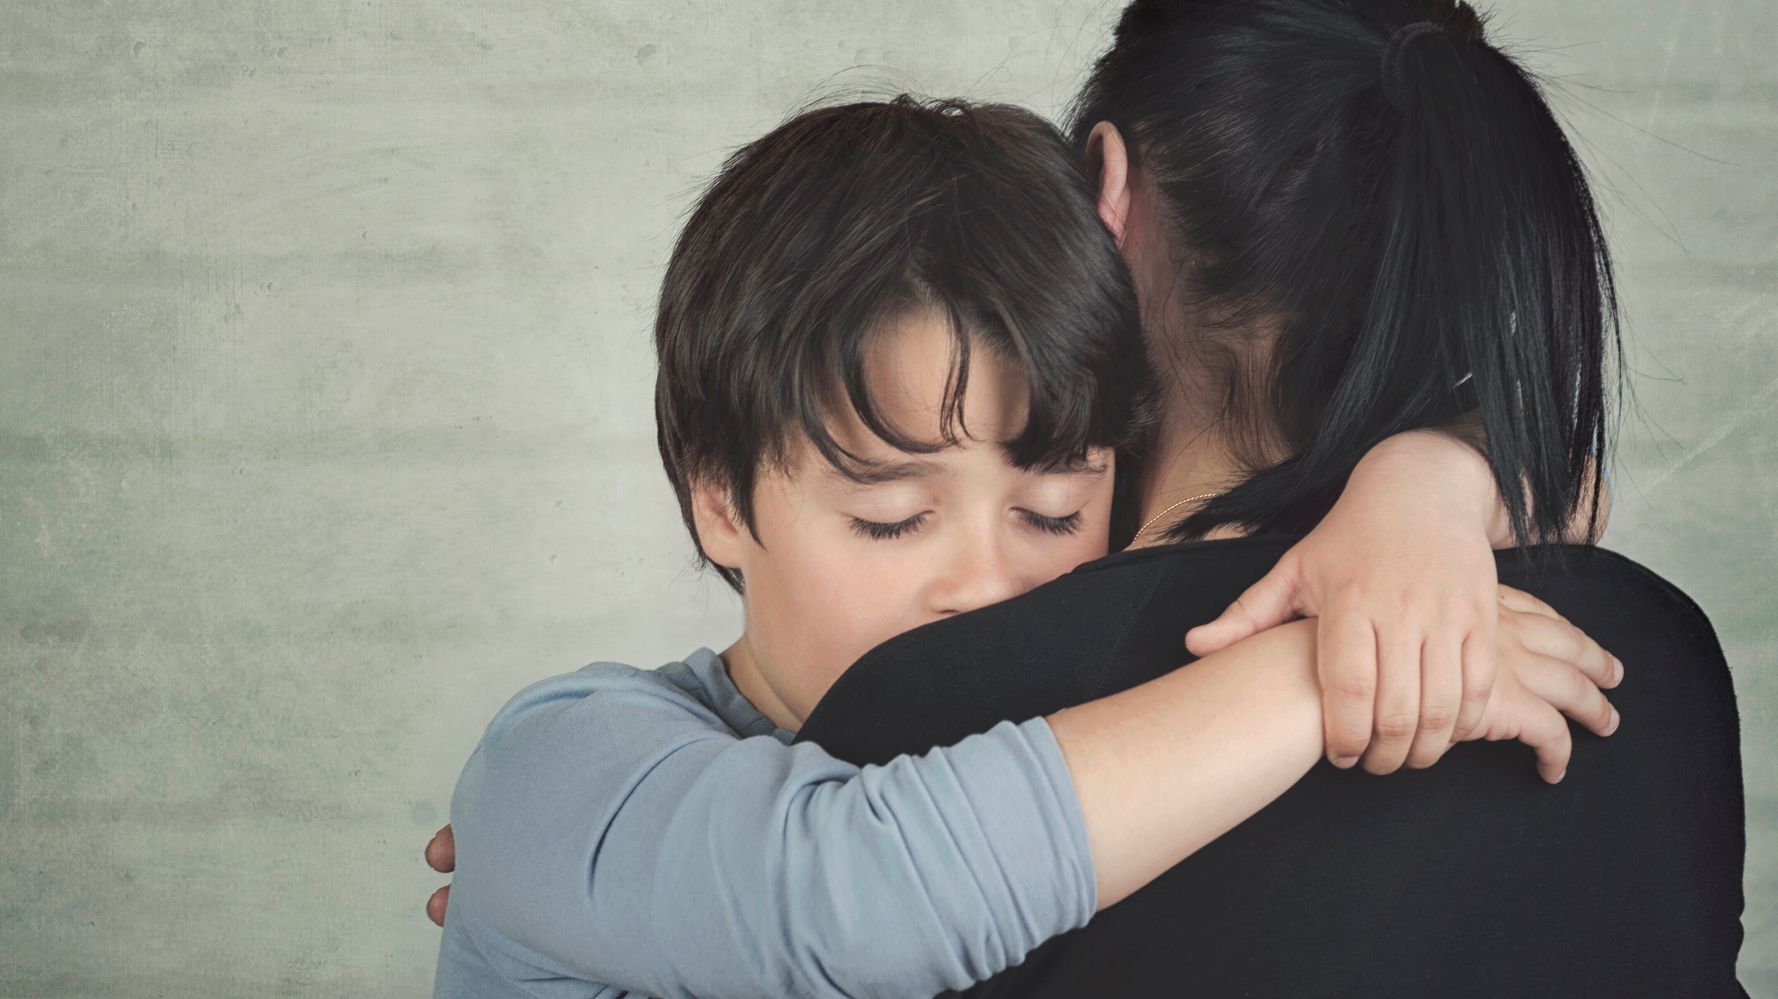 What Social Distancing Is Like For Parents Of Kids With Autism